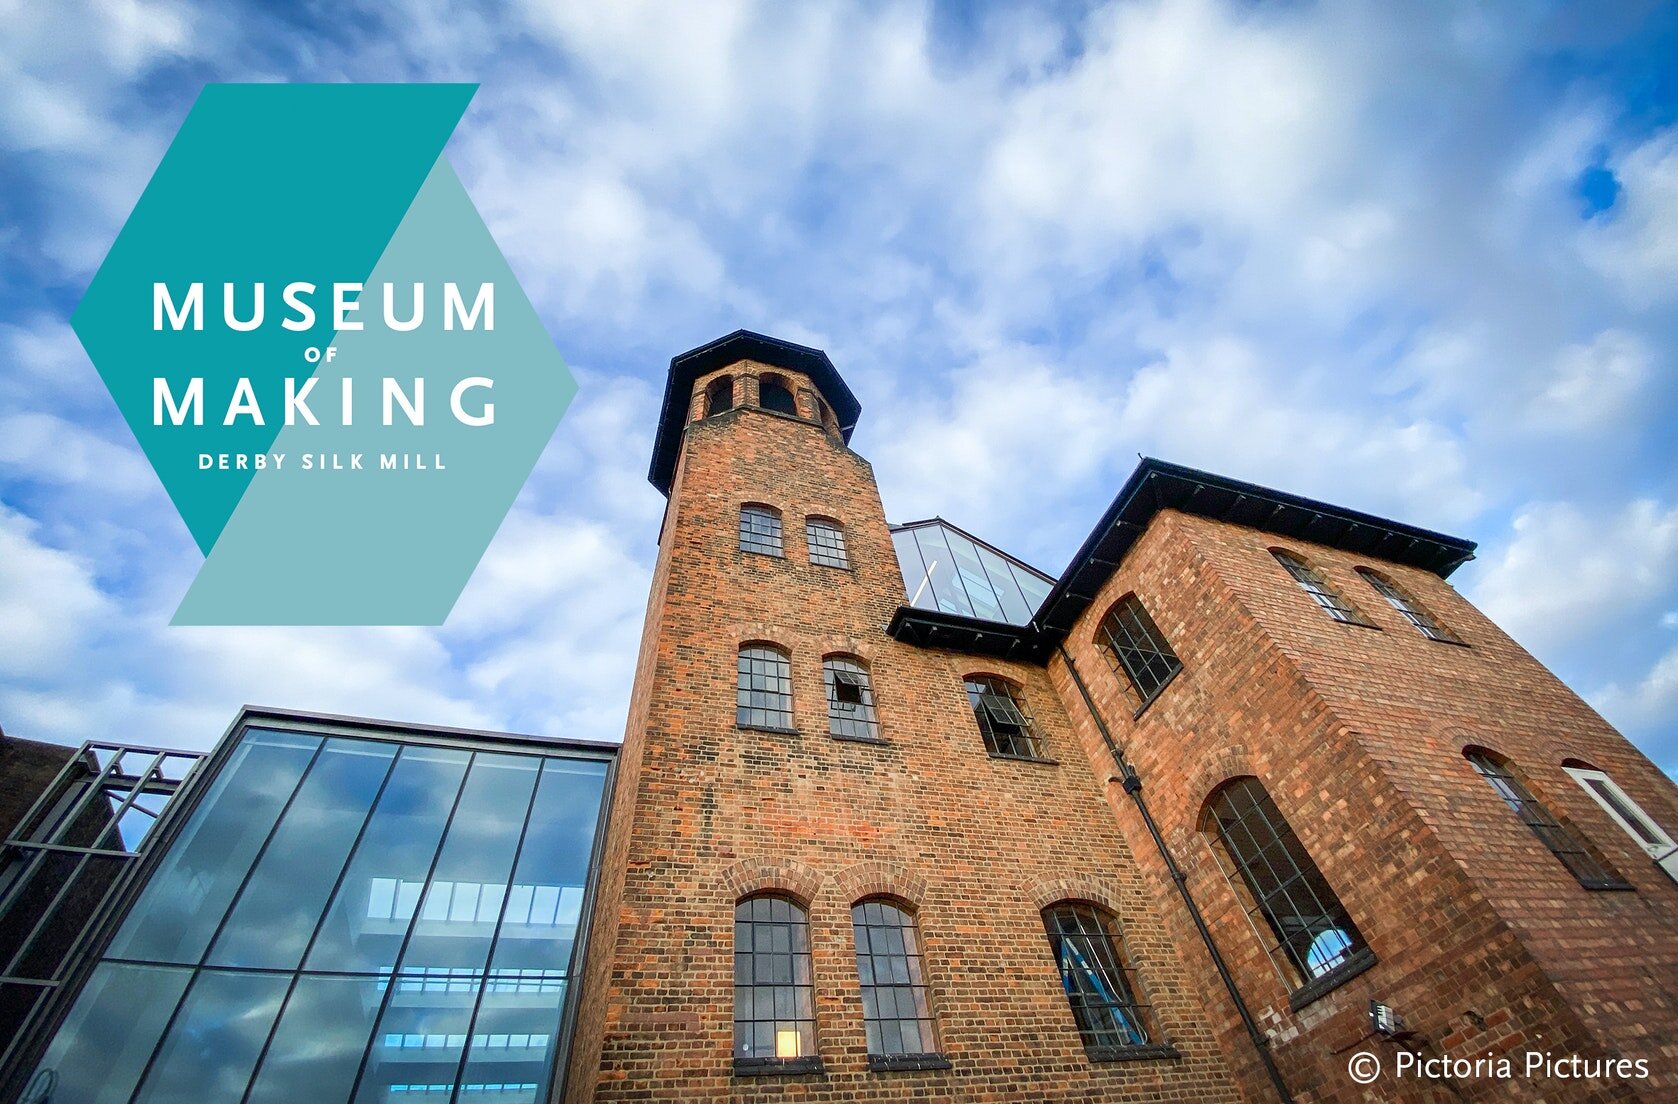 The Museum of Making